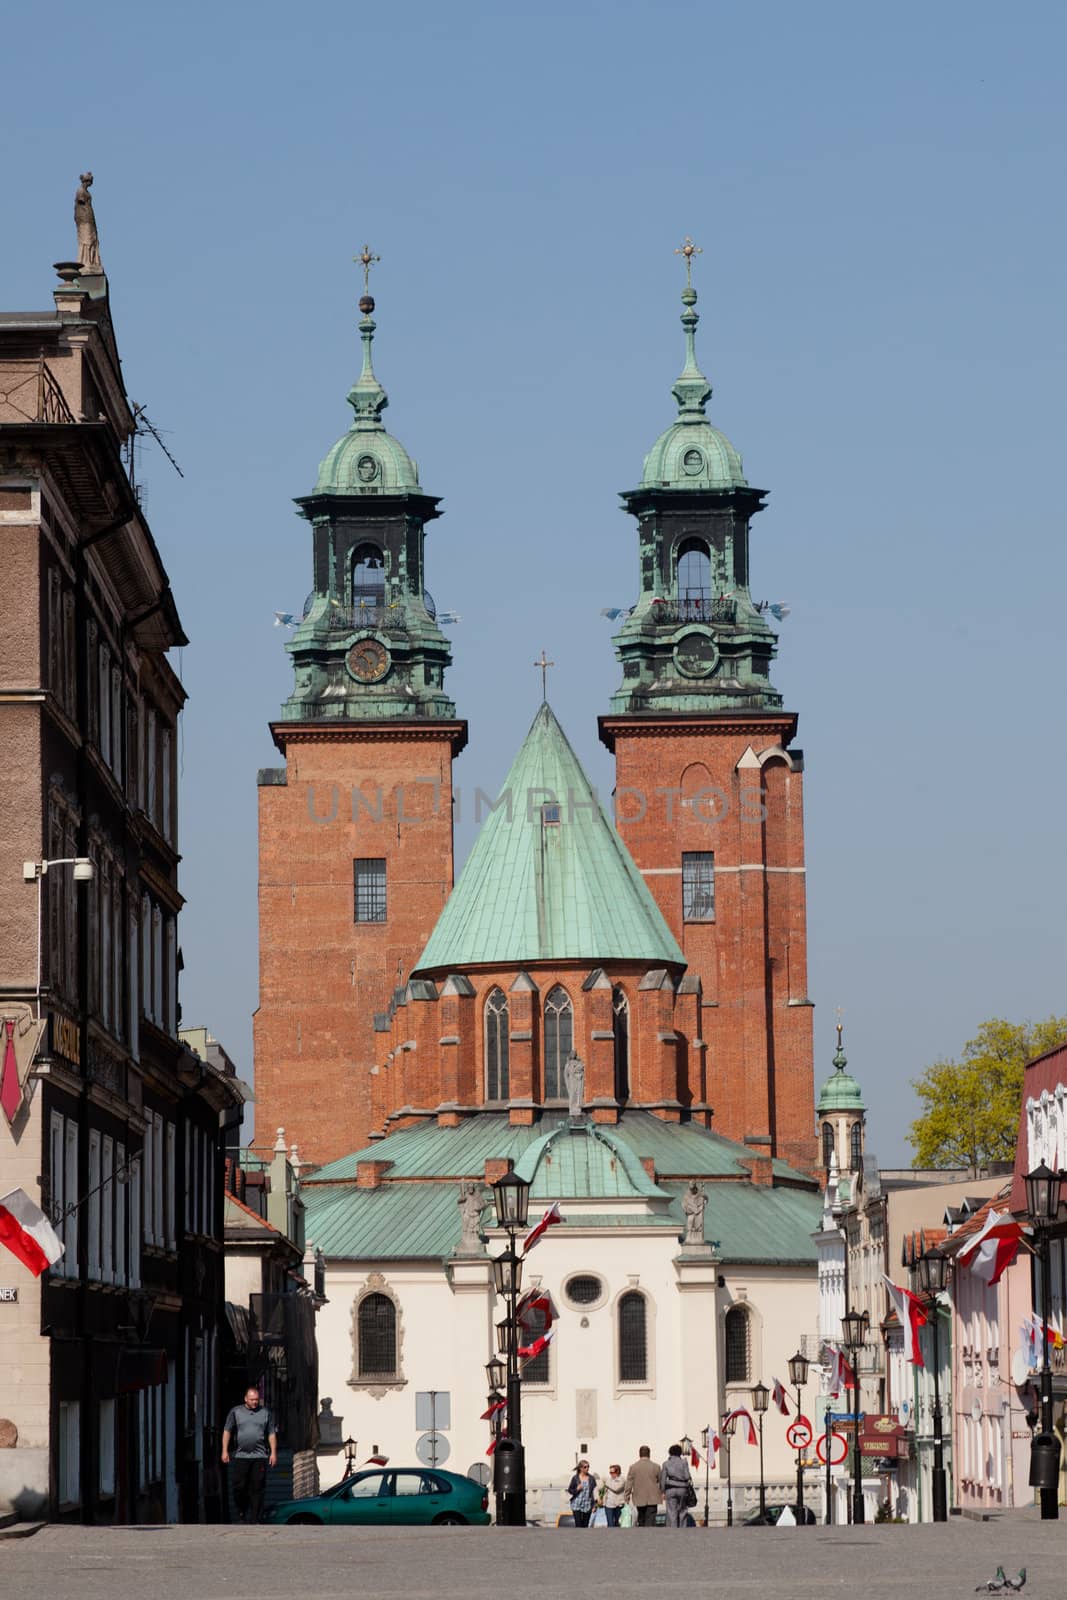 Gniezno was the first capital of Poland in the 10th century.